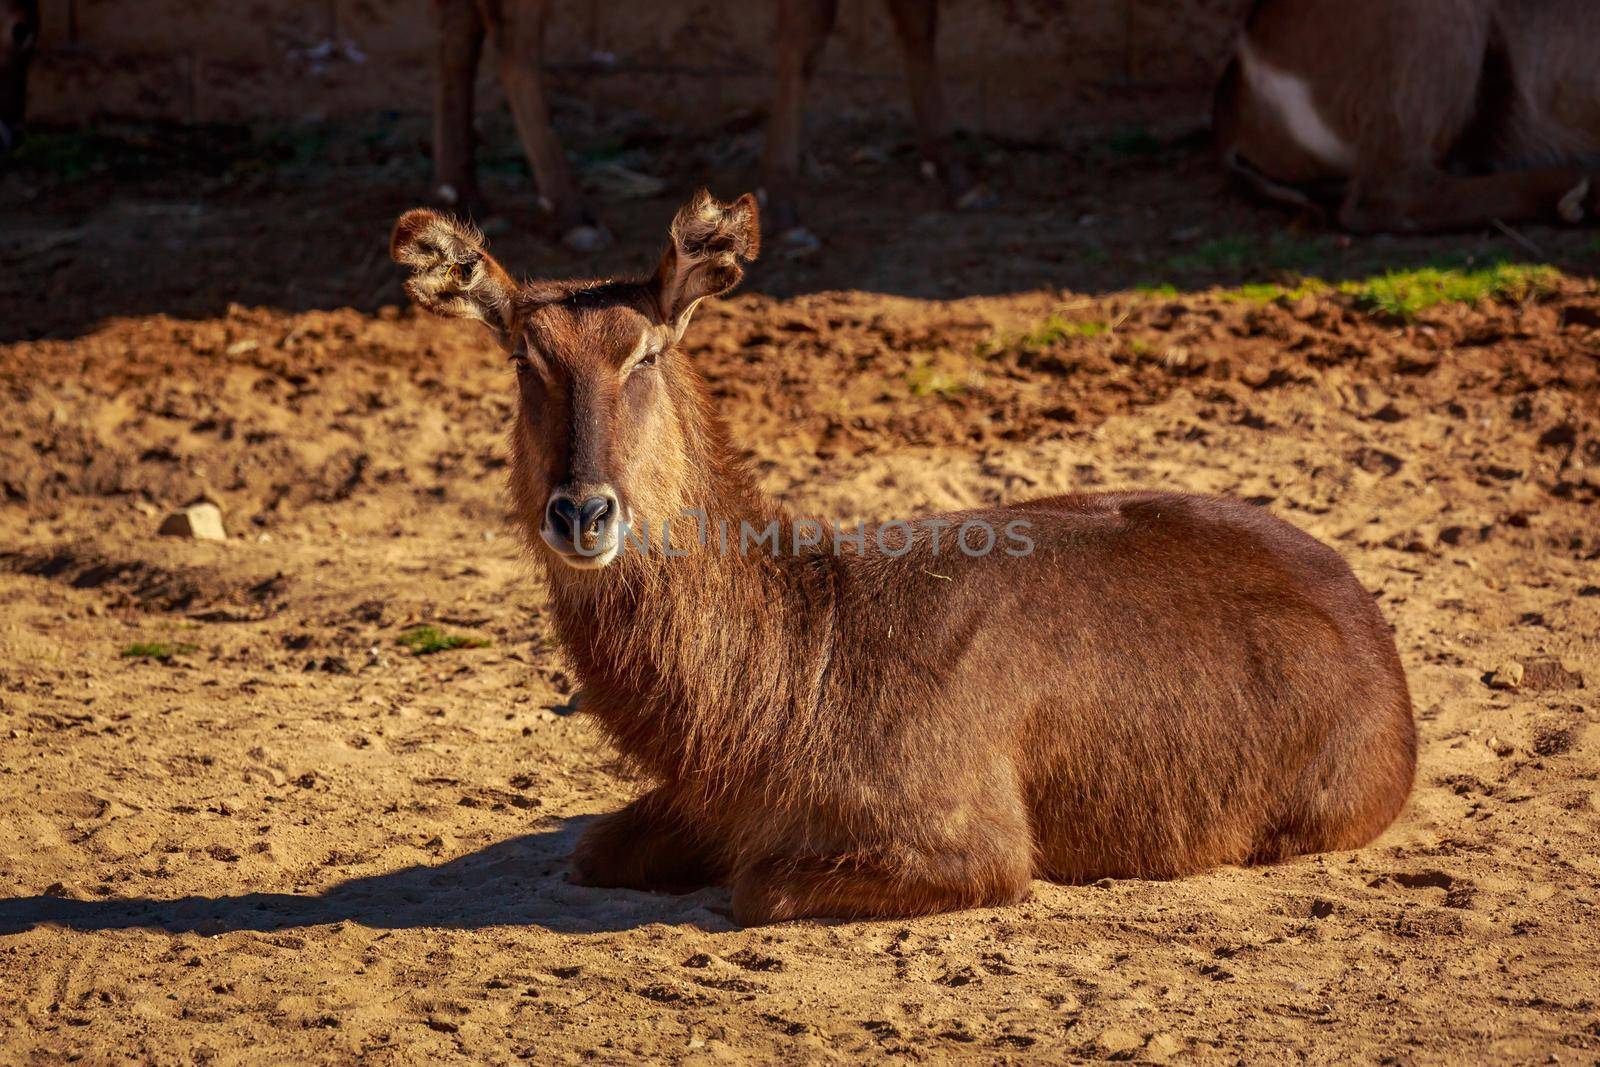 Female Waterbuck rest on the ground